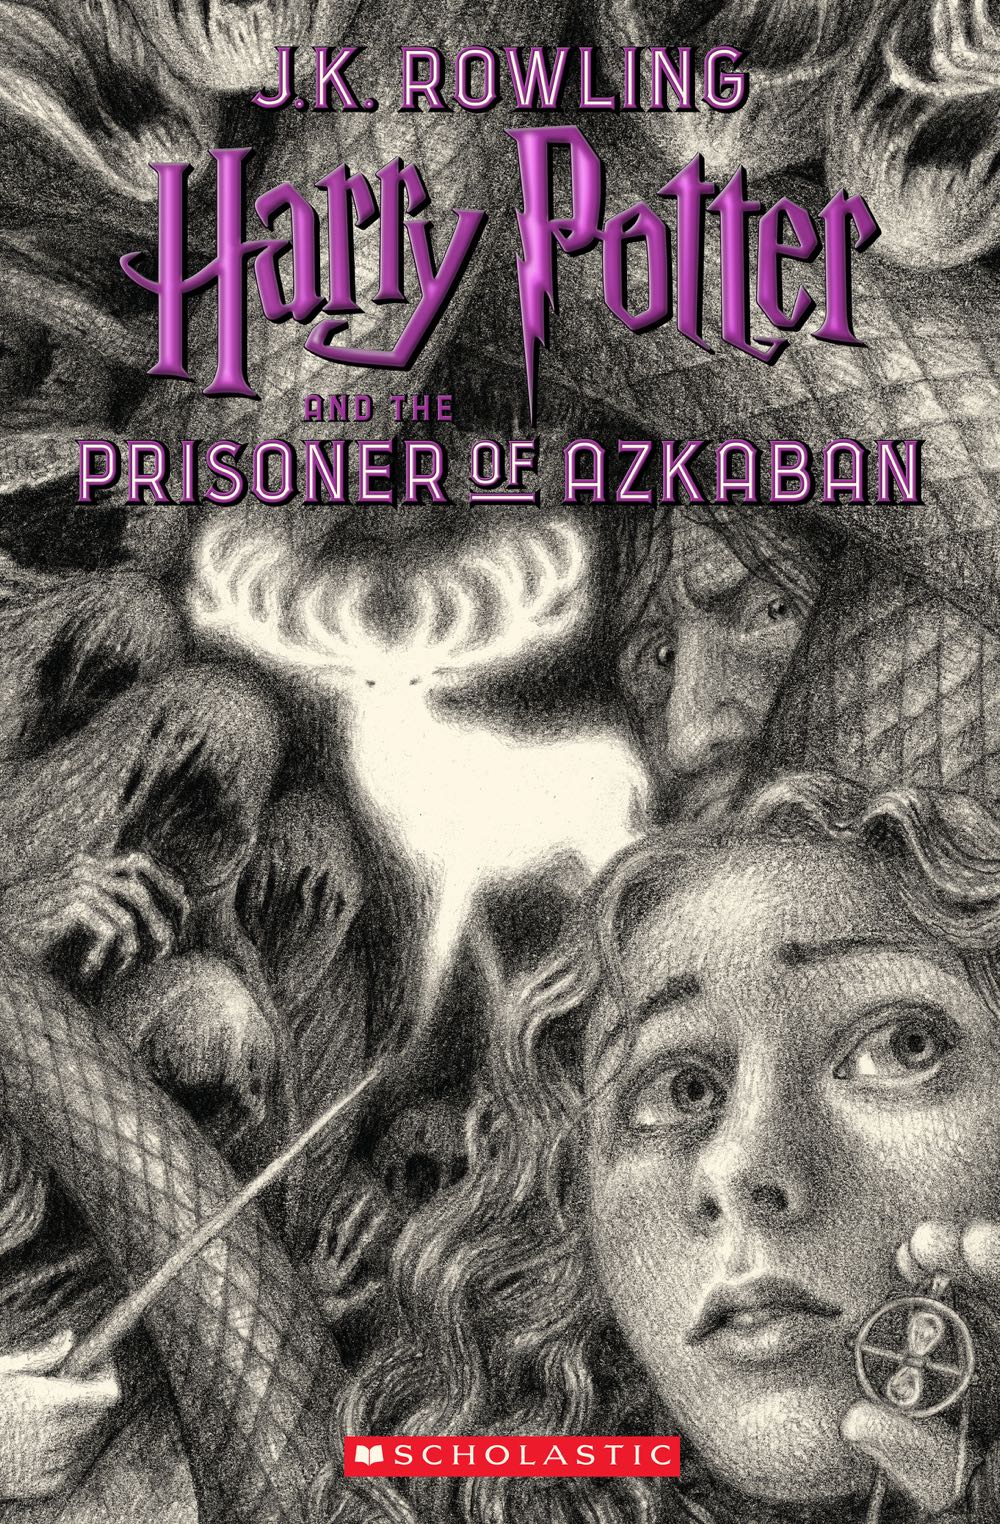 Harry Potter and the Prisoner of Azkaban - J. K. Rowling (Arthur A. Levine Books / Scholastic Press - Hardcover) book collectible [Barcode 9780439136358] - Main Image 4